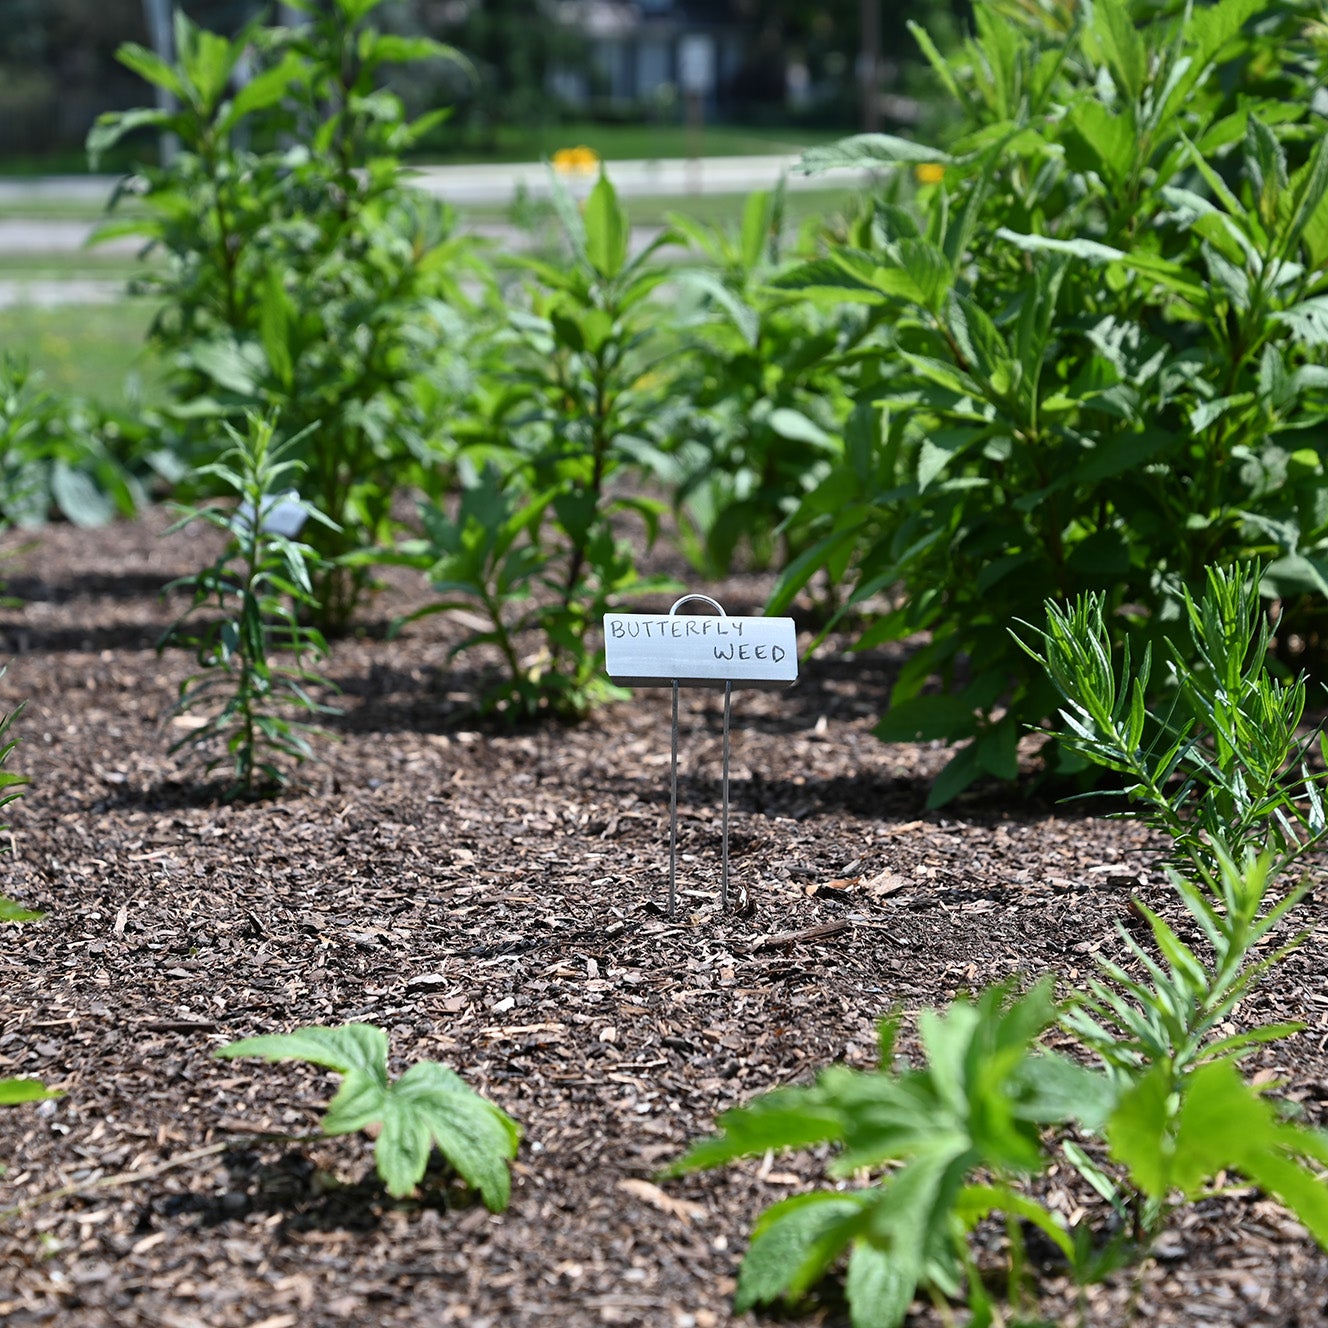 A sign saying "Butterfly Weed" in Grebel's pollinator garden